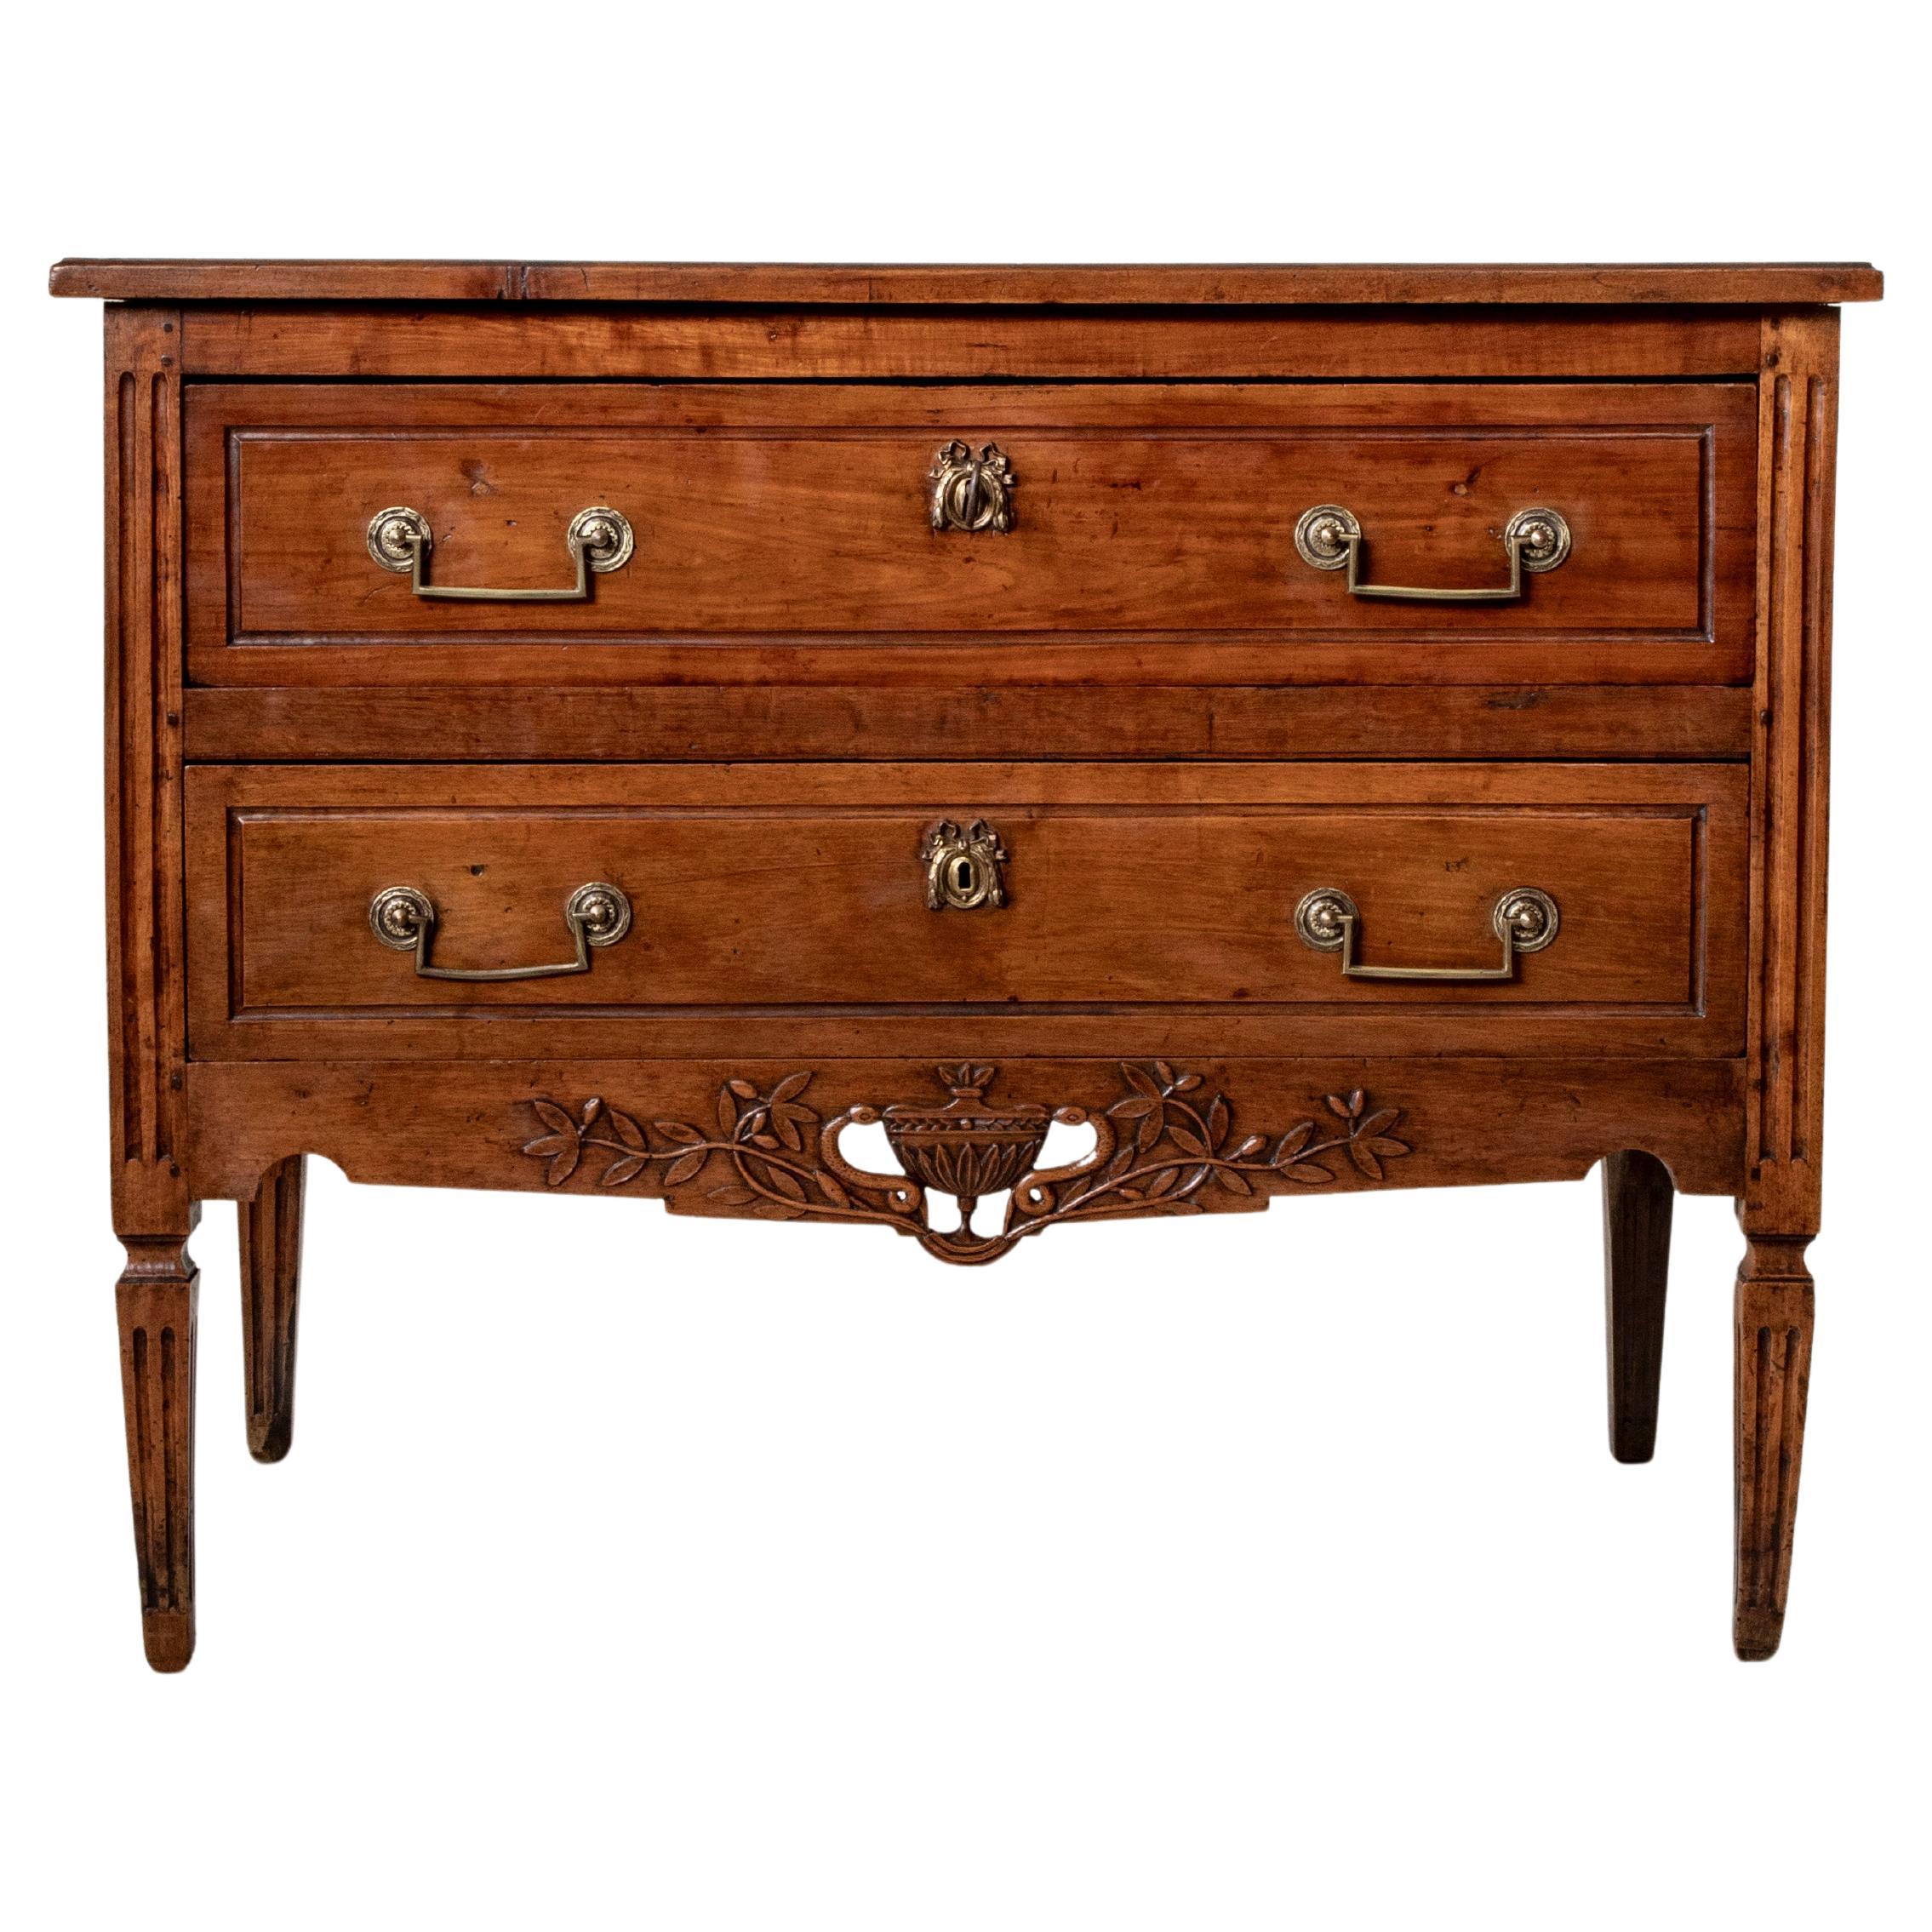 Late 18th Century French Louis XVI Period Walnut Commode or Chest of Drawers